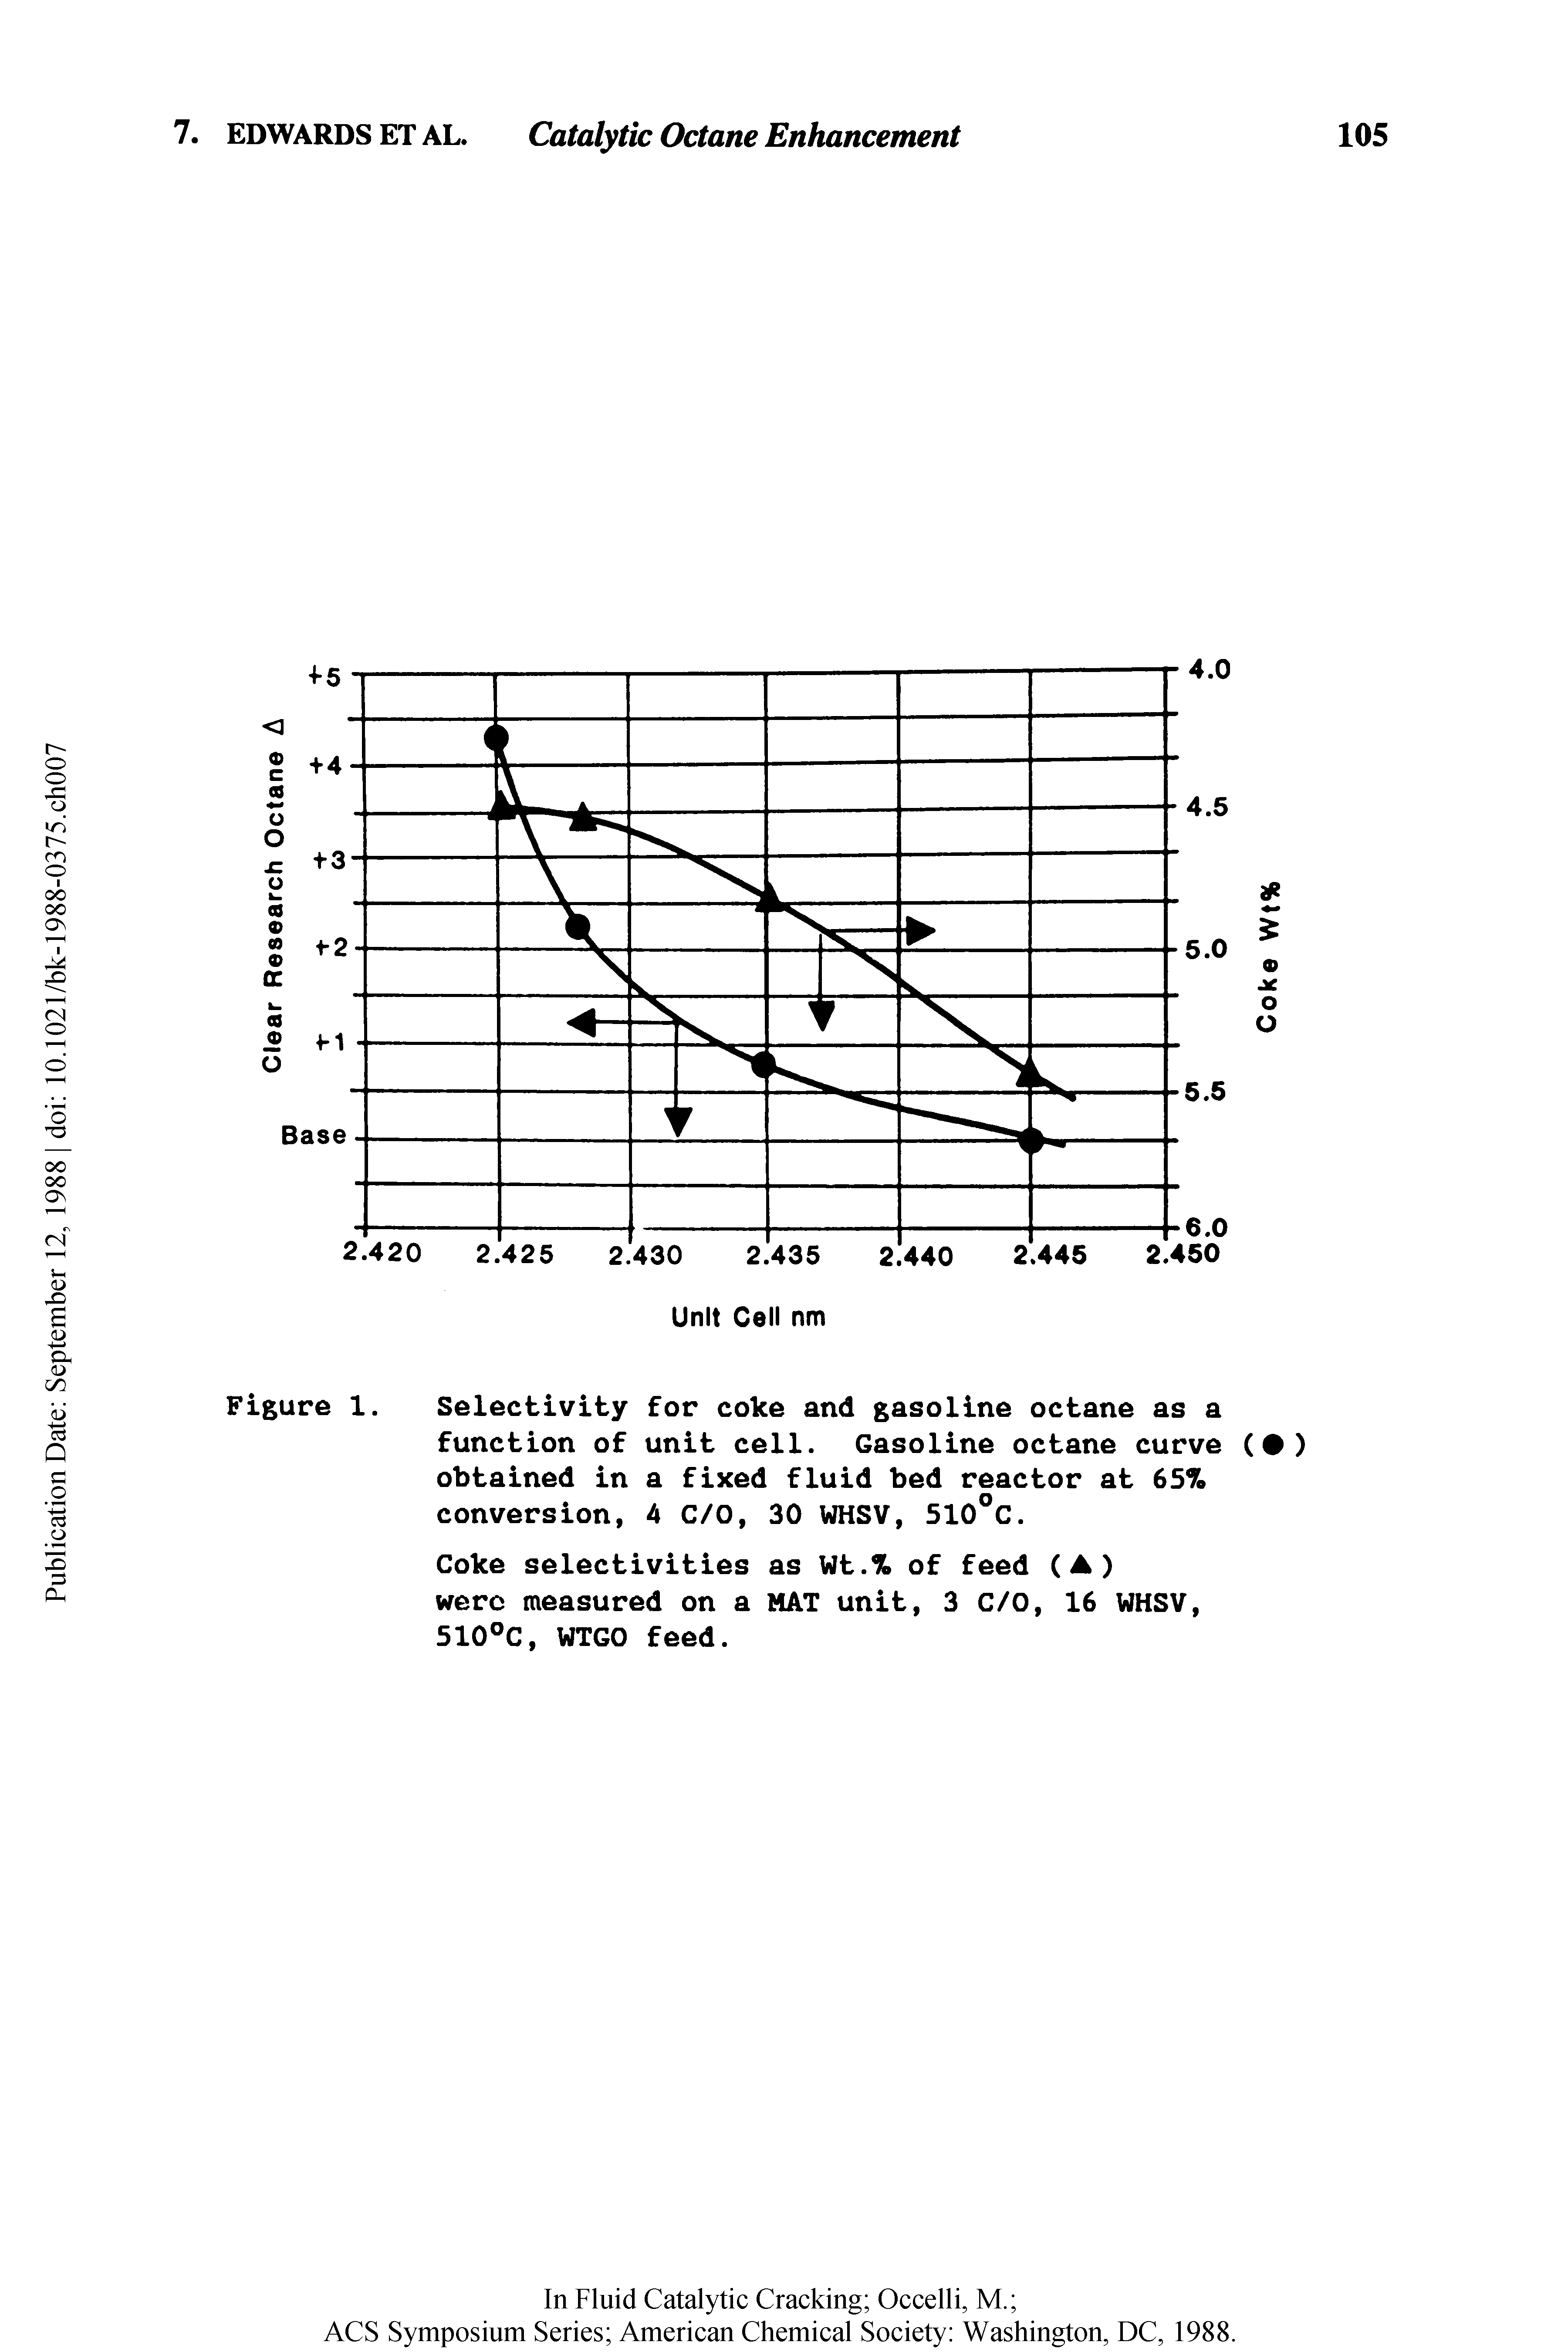 Figure 1. Selectivity for coke and gasoline octane as a function of unit cell. Gasoline octane curve obtained in a fixed fluid bed reactor at 657e conversion, 4 C/0, 30 WHSV, 510°C.